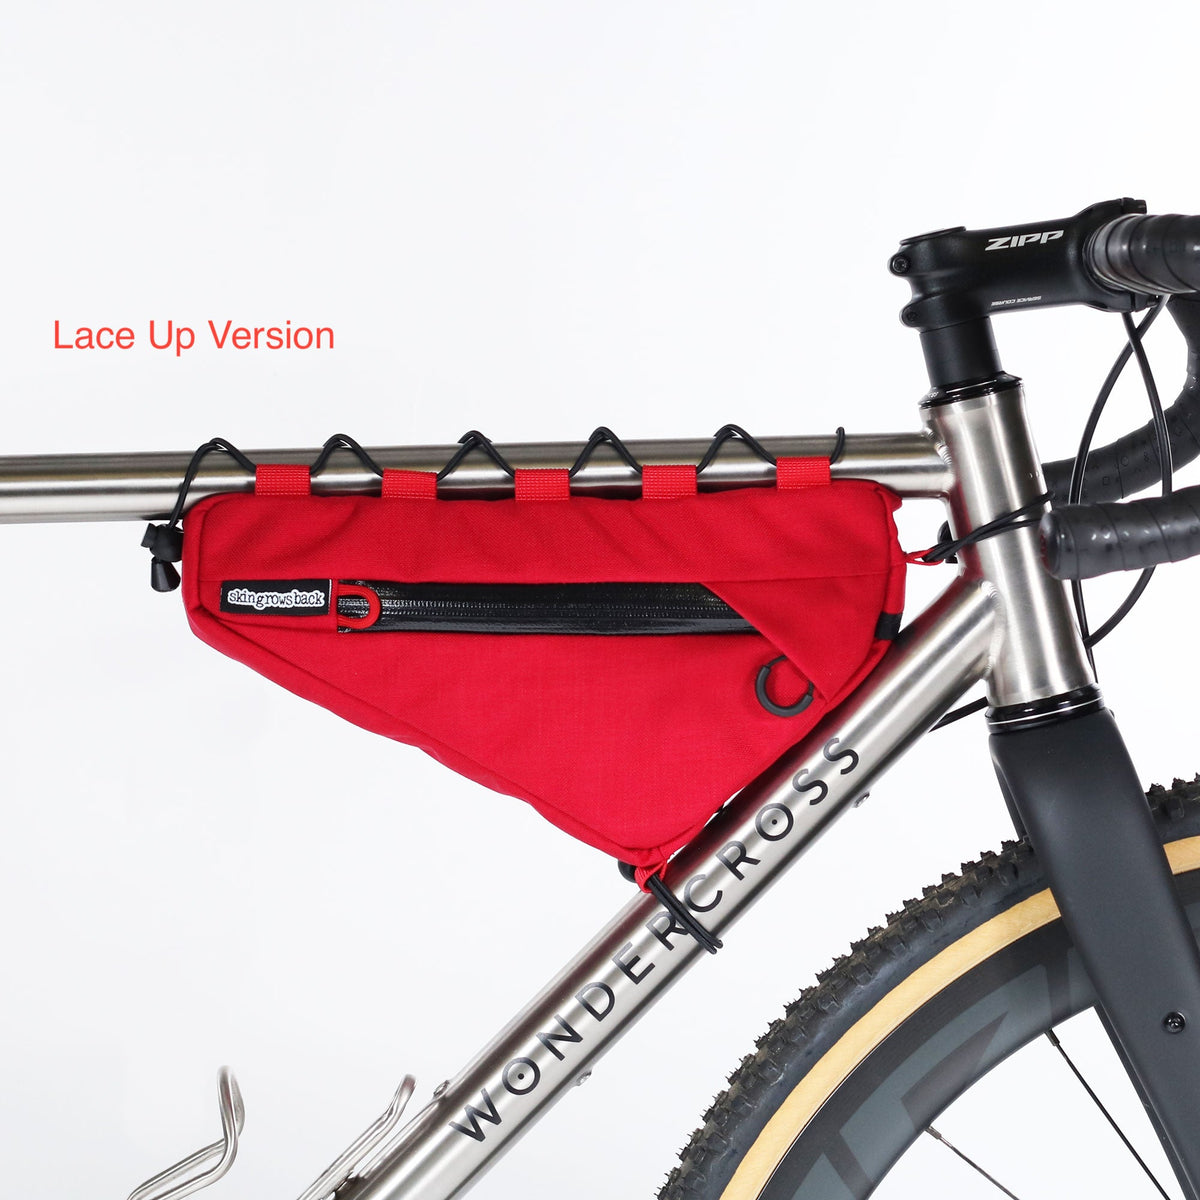 skingrowsback wedge frame bag cycling gravel bike imperial red lace up